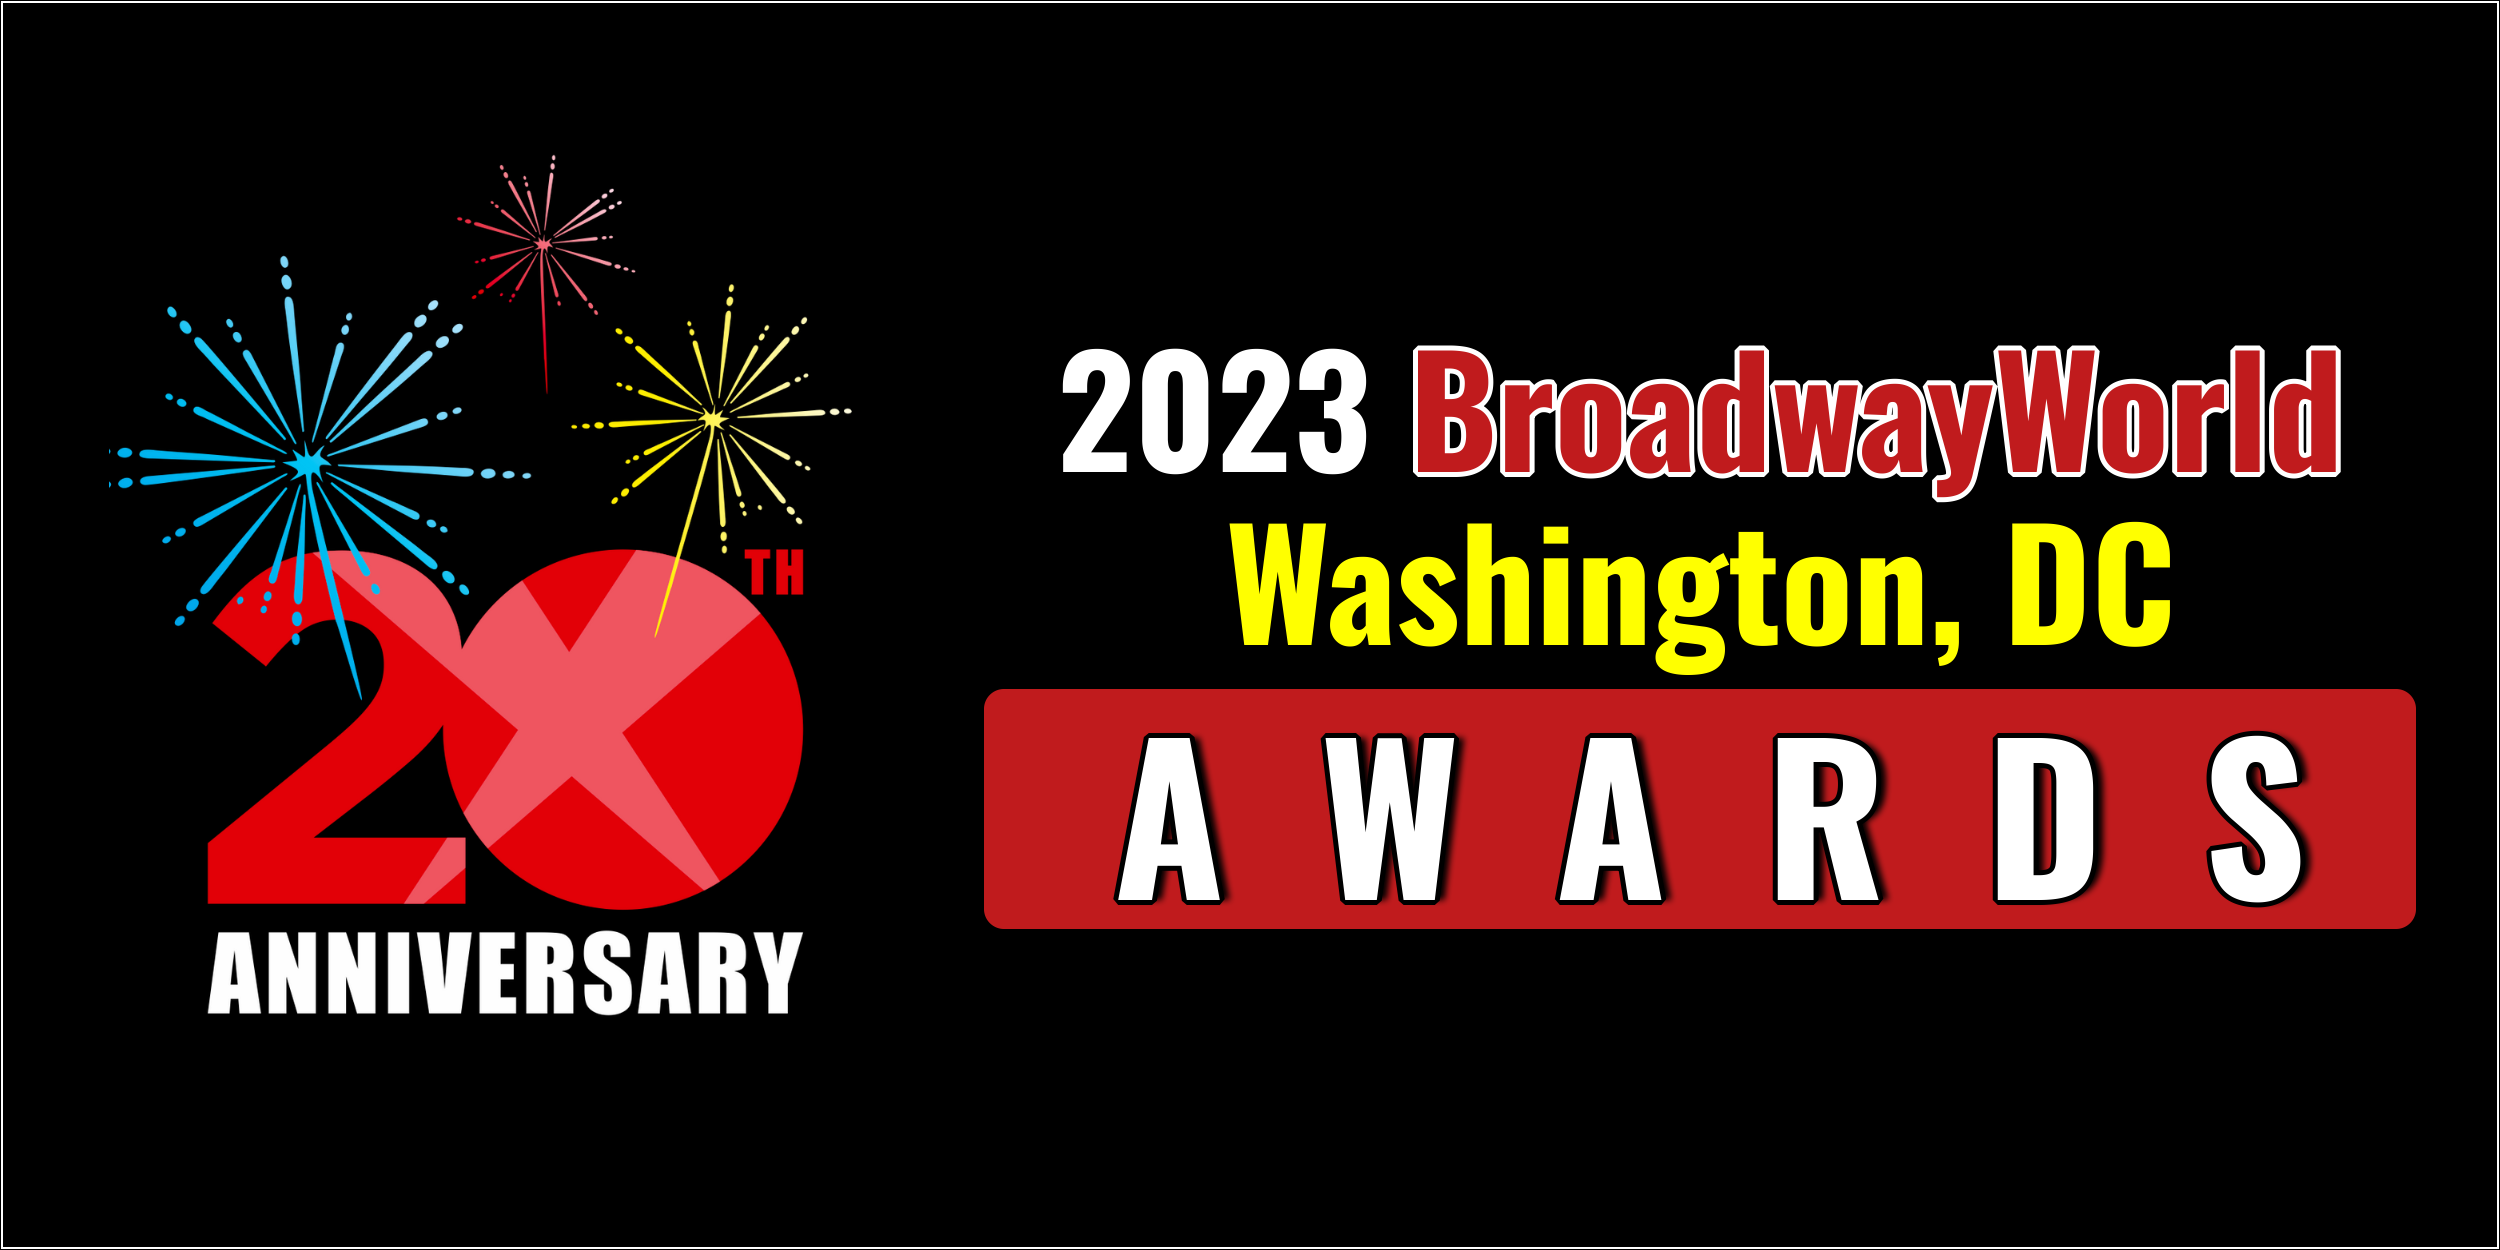 Latest Standings Announced For The 2023 BroadwayWorld Washington, DC Awards;  Leads Favorite Local Theatre! 